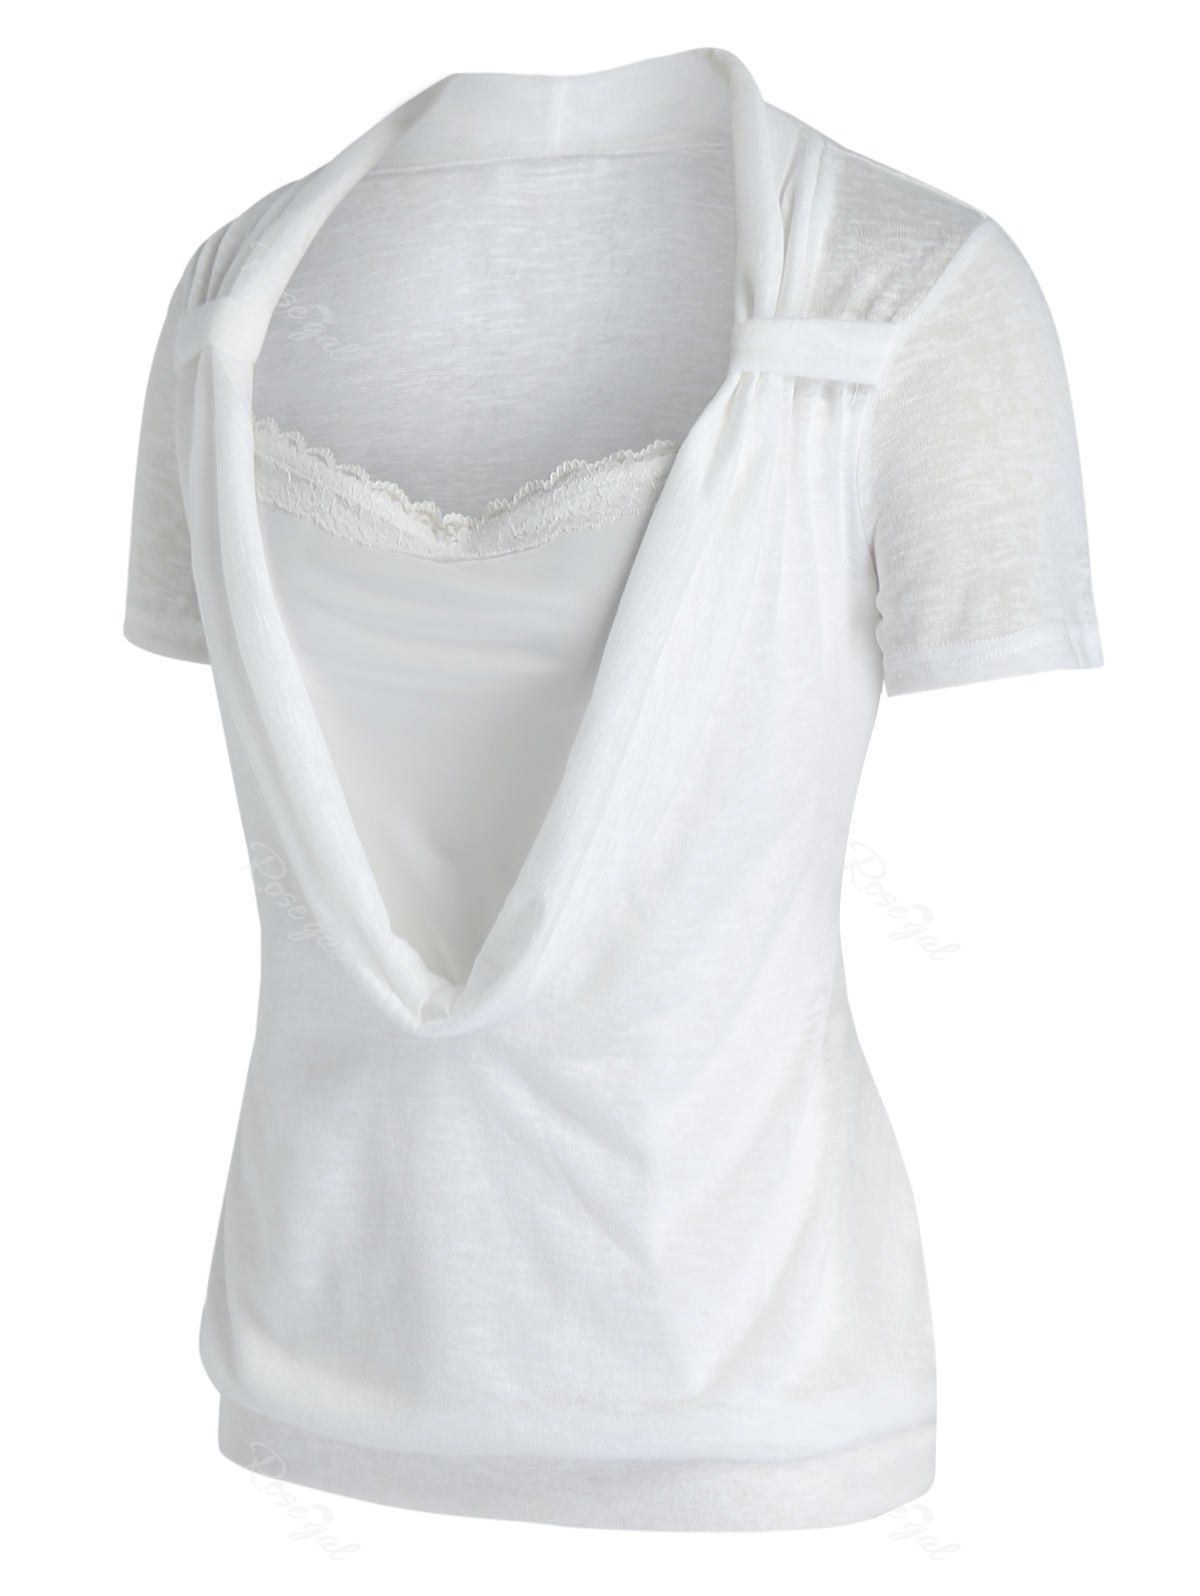 Sale Plus Size Cowl Front Marled Lace Embellished T Shirt  